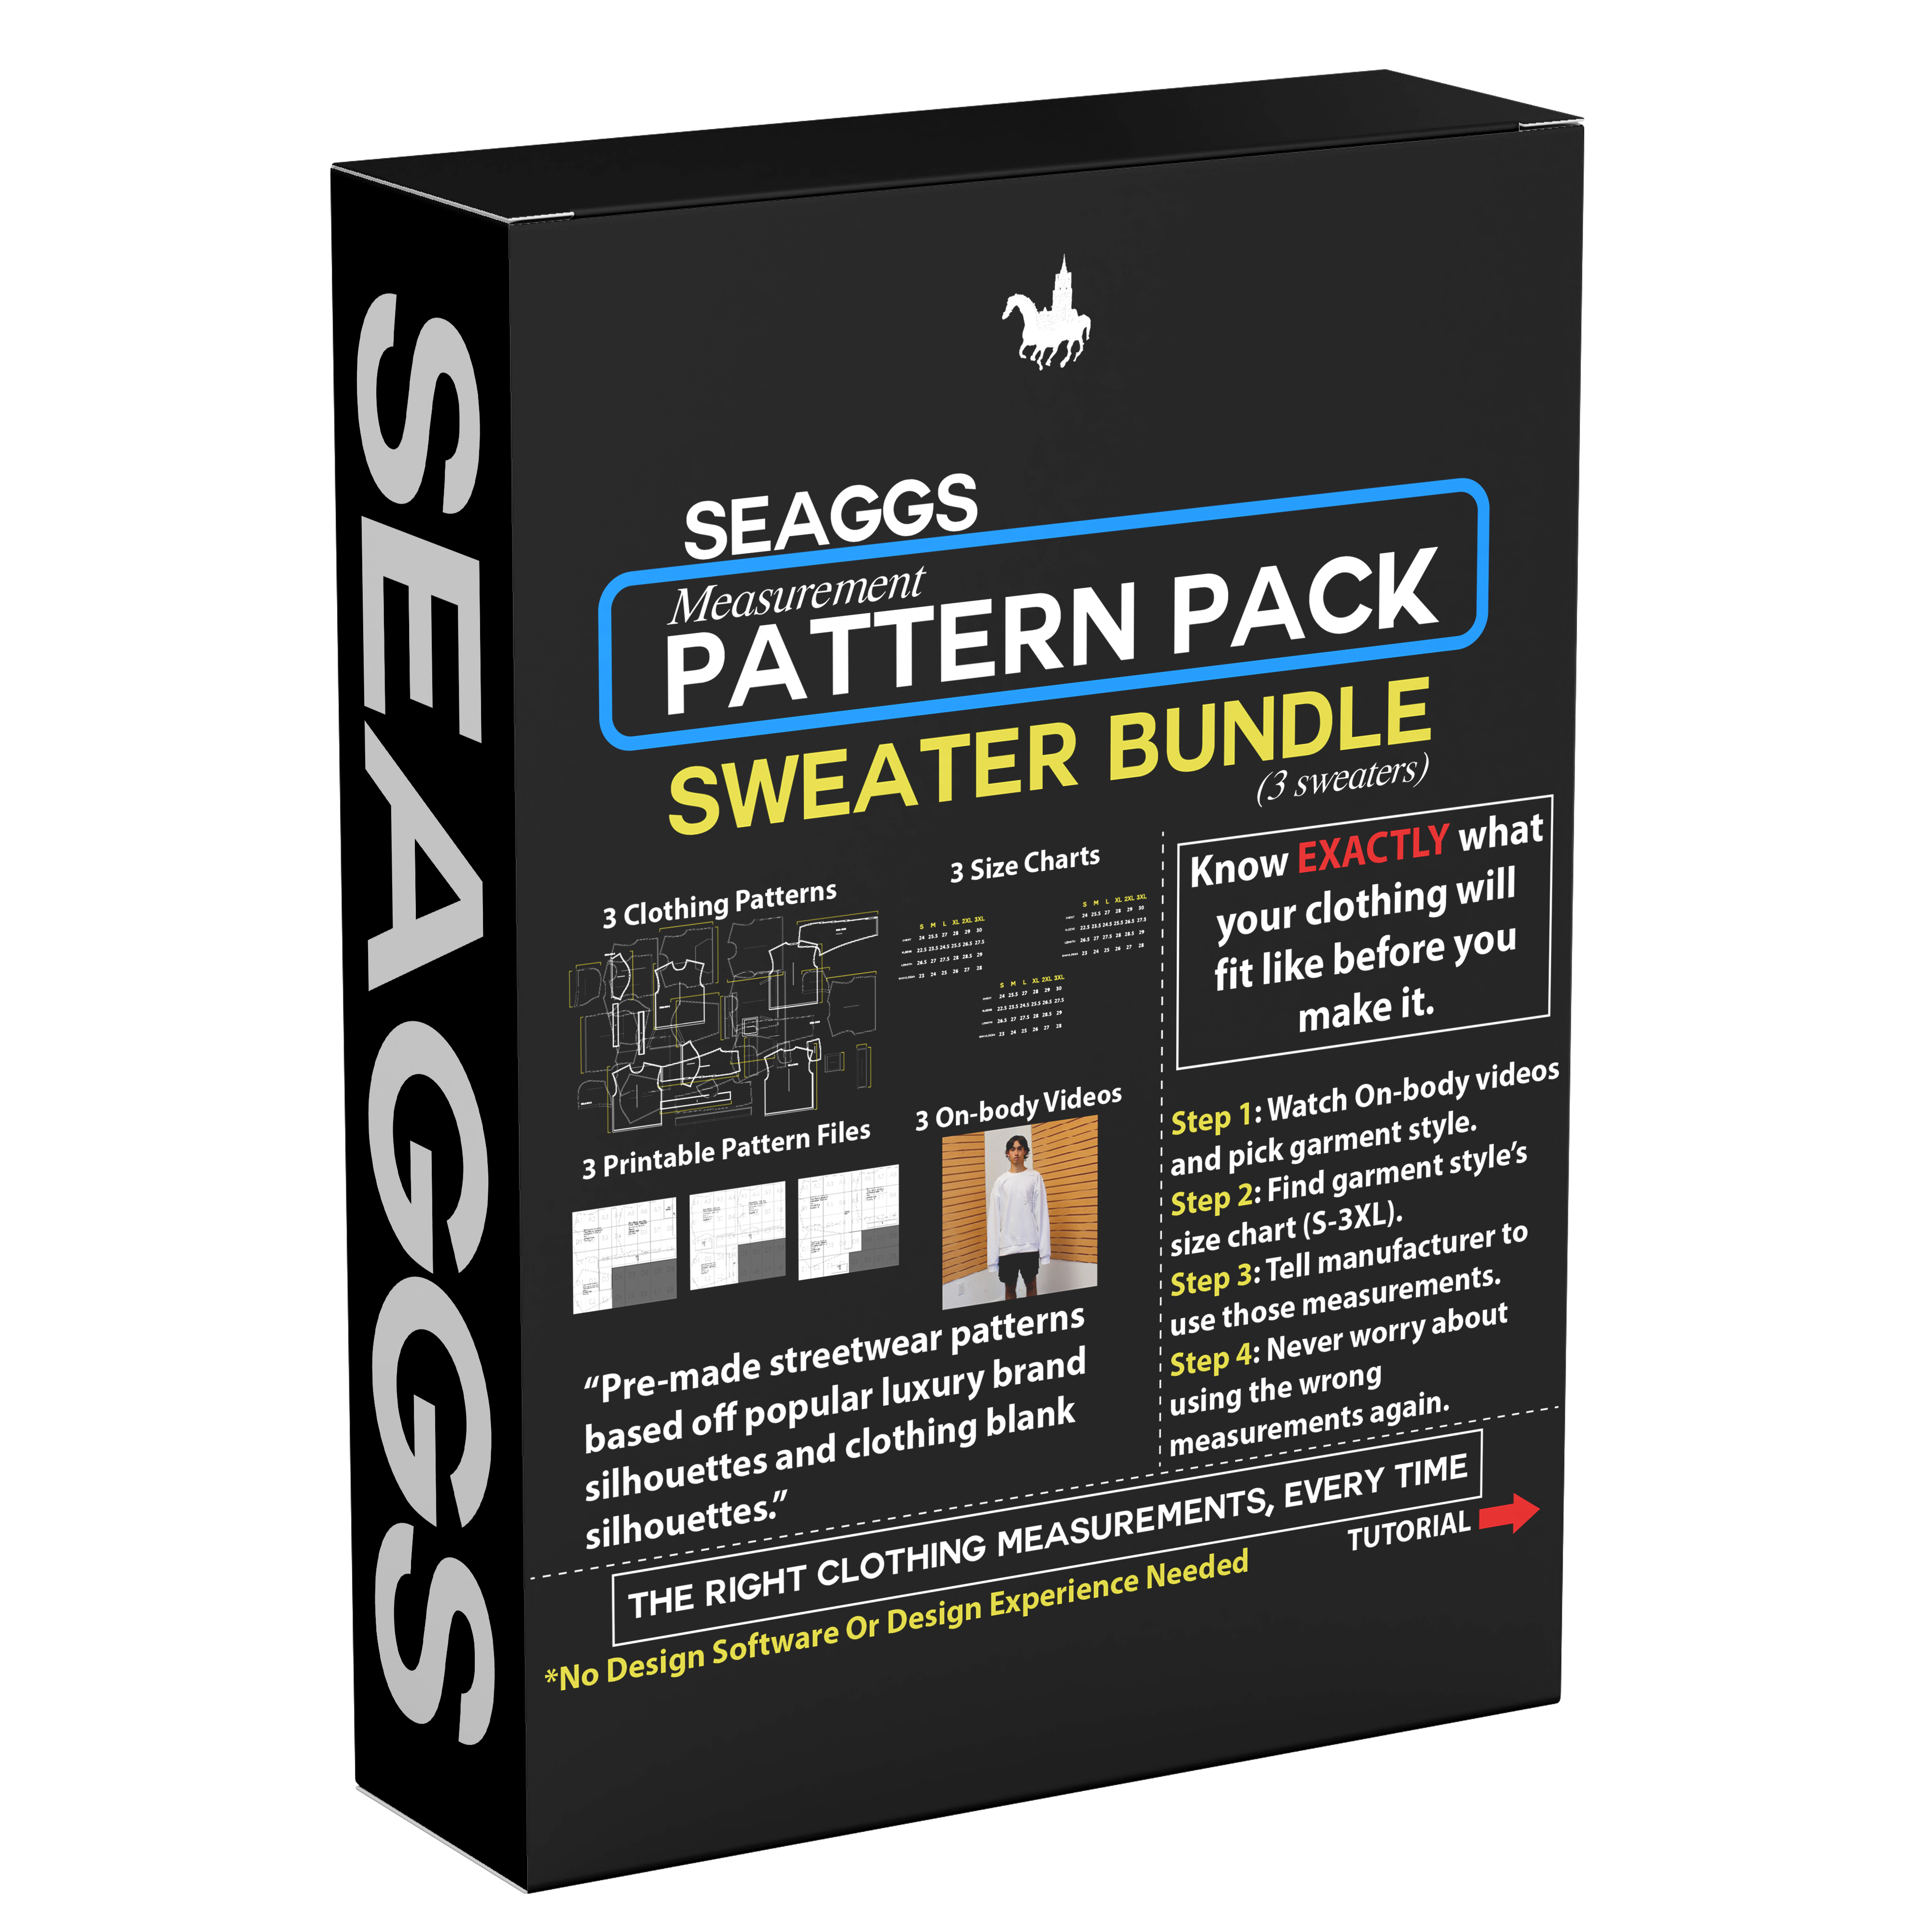 Seaggs Pattern Pack SWEATER BUNDLE